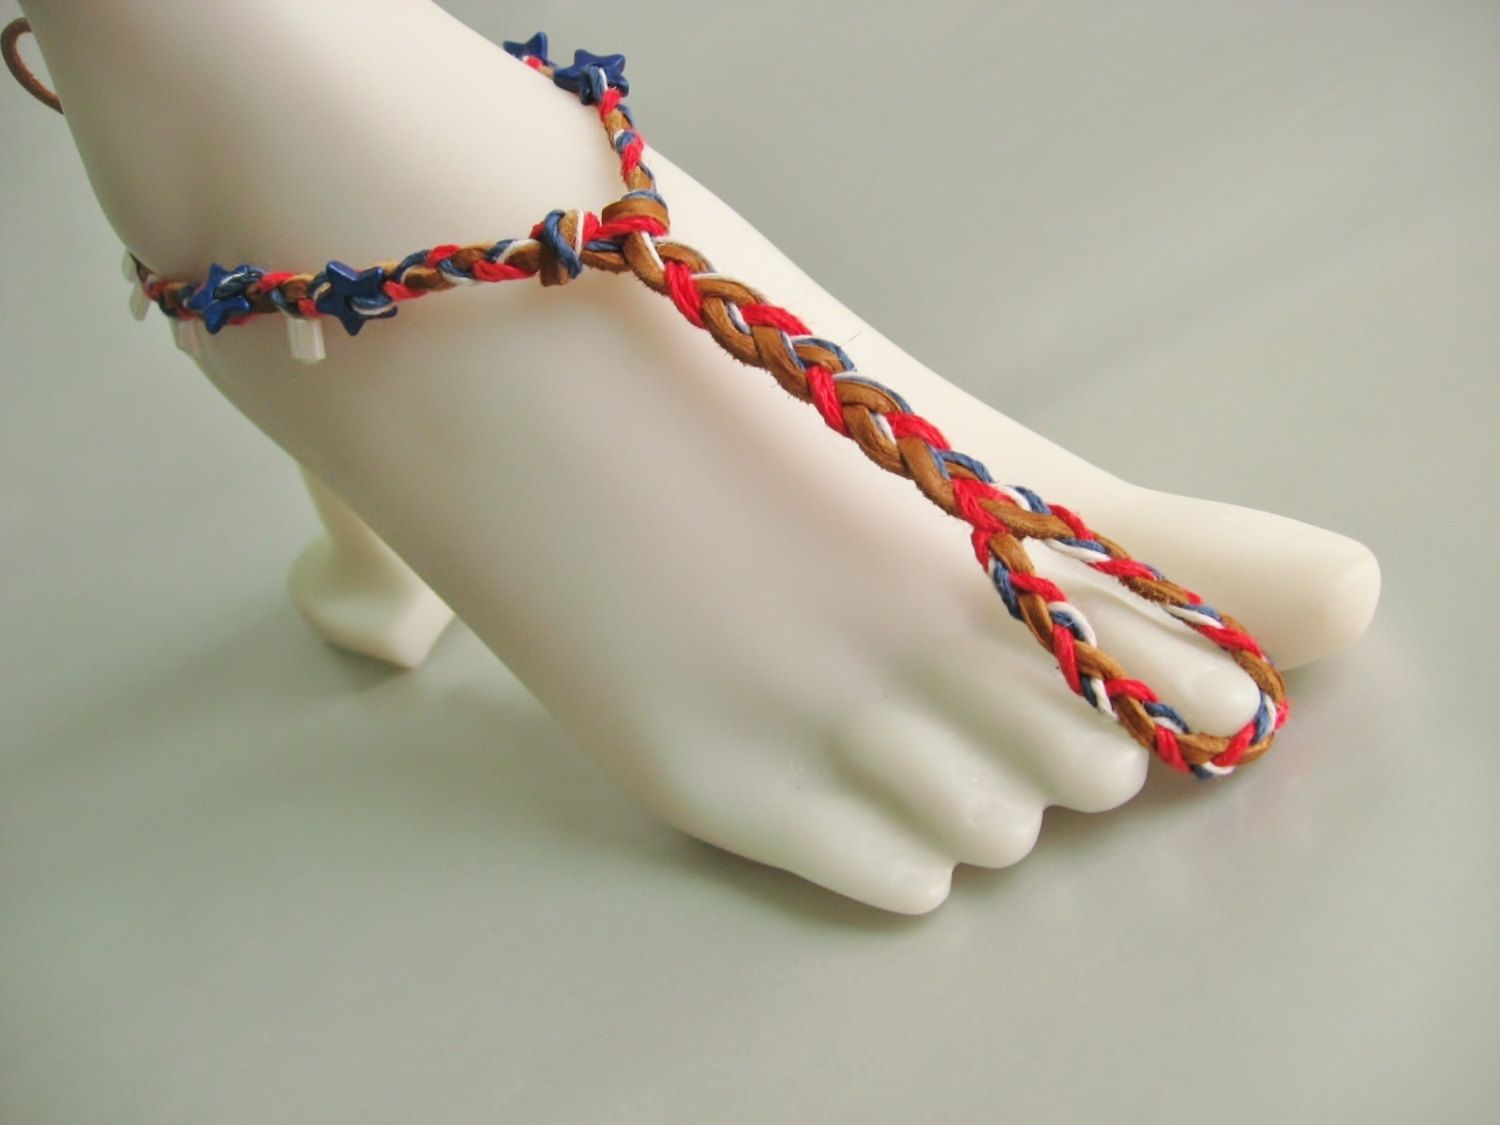 Hand Crafted Slave Anklet. Tan Deerskin And Hemp Cords. Red, White And  Blue. Hand Braided. Foot Jewelry. by Barefoot or Not LLC